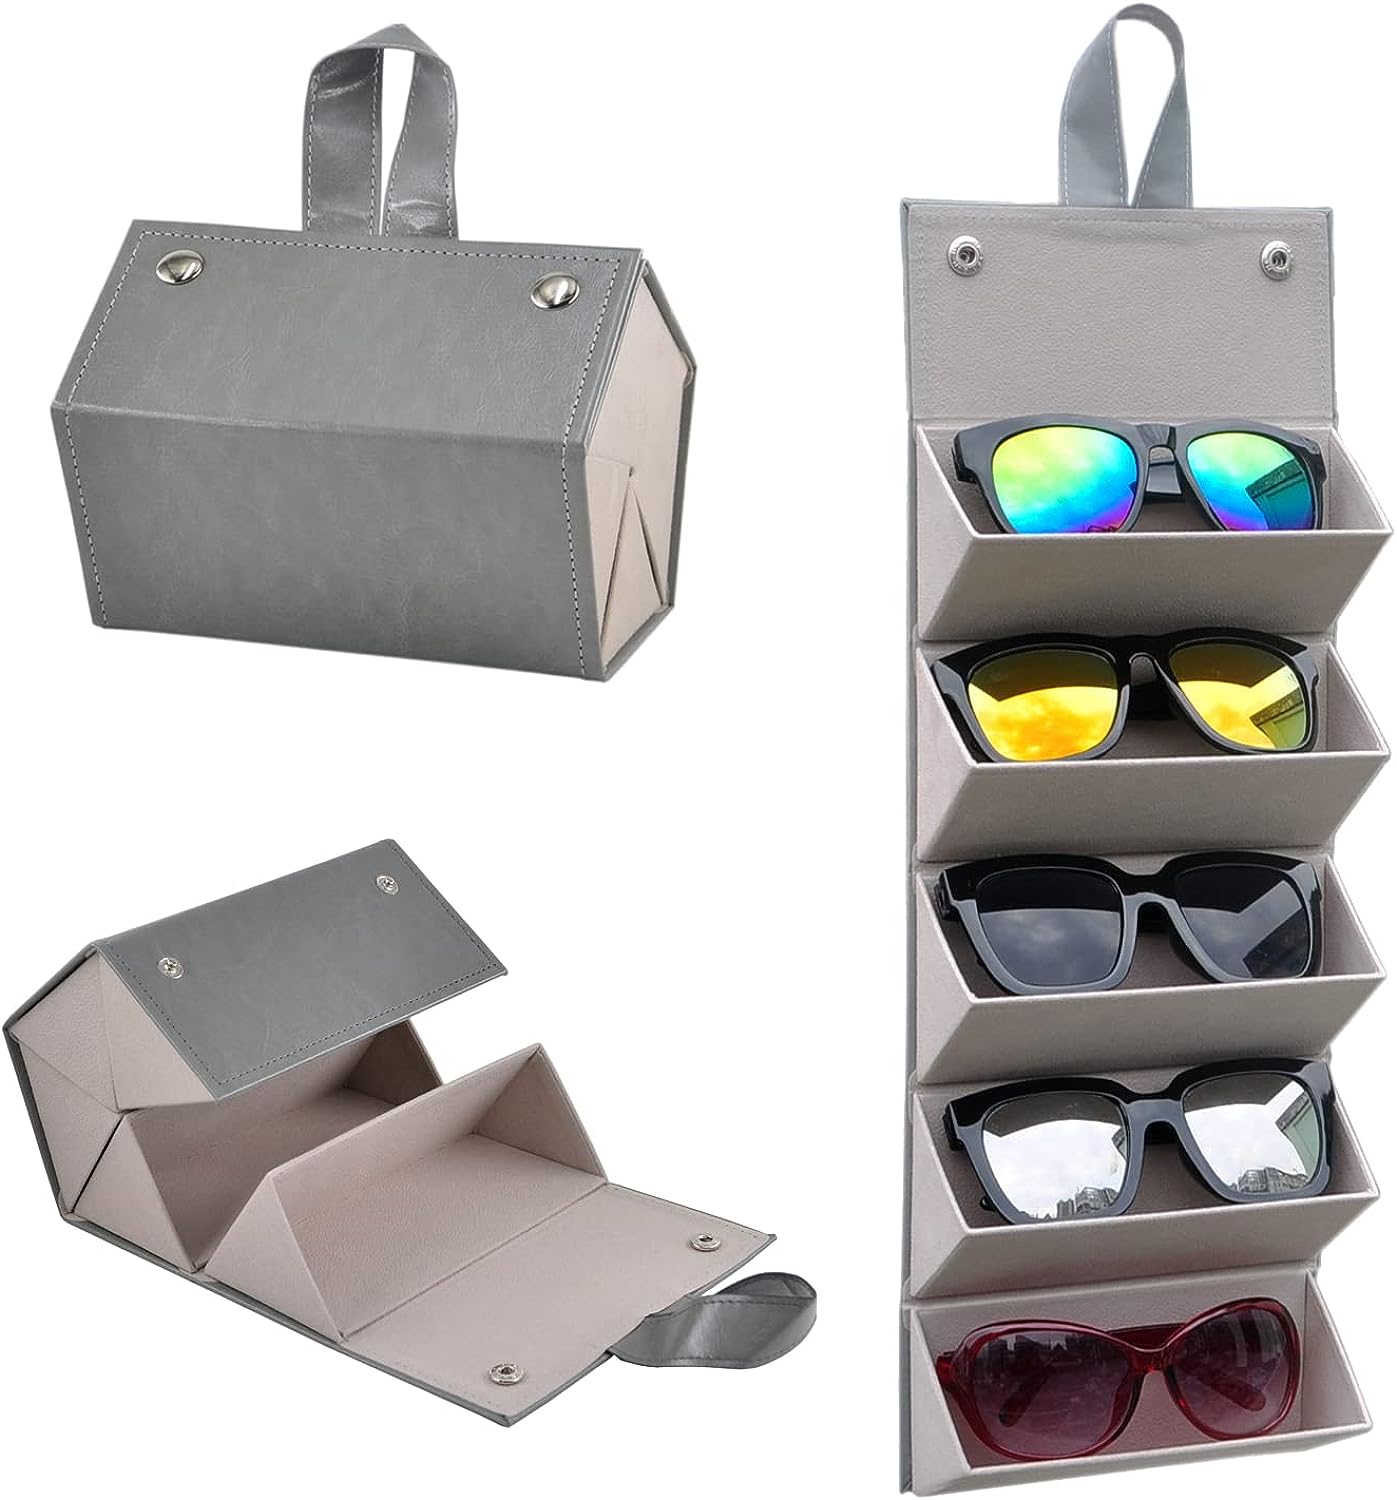 Blushbees® Foldable Travel Sunglasses Case - Leather, 5 Slot Organizer with Strap